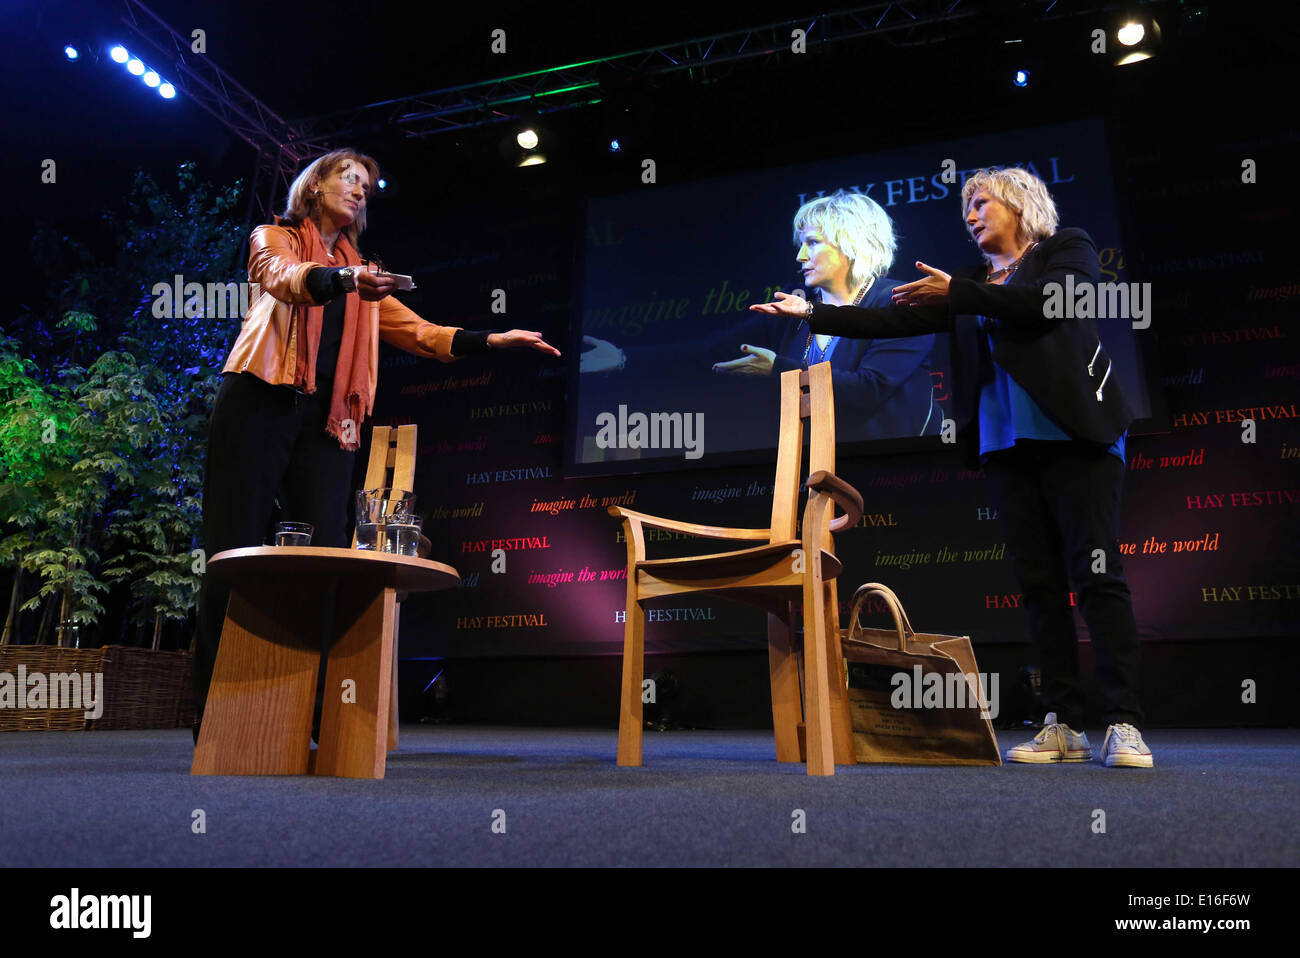 Hay on Wye, Powys, Wales, UK. 24th May, 2014.  Pictured: Jennifer Saunders (R) on stage with Francine Stock (L). Re: The Telegraph Hay Festival, Hay on Wye, Powys, Wales UK. © D Legakis/Alamy Live News Credit:  D Legakis/Alamy Live News Stock Photo